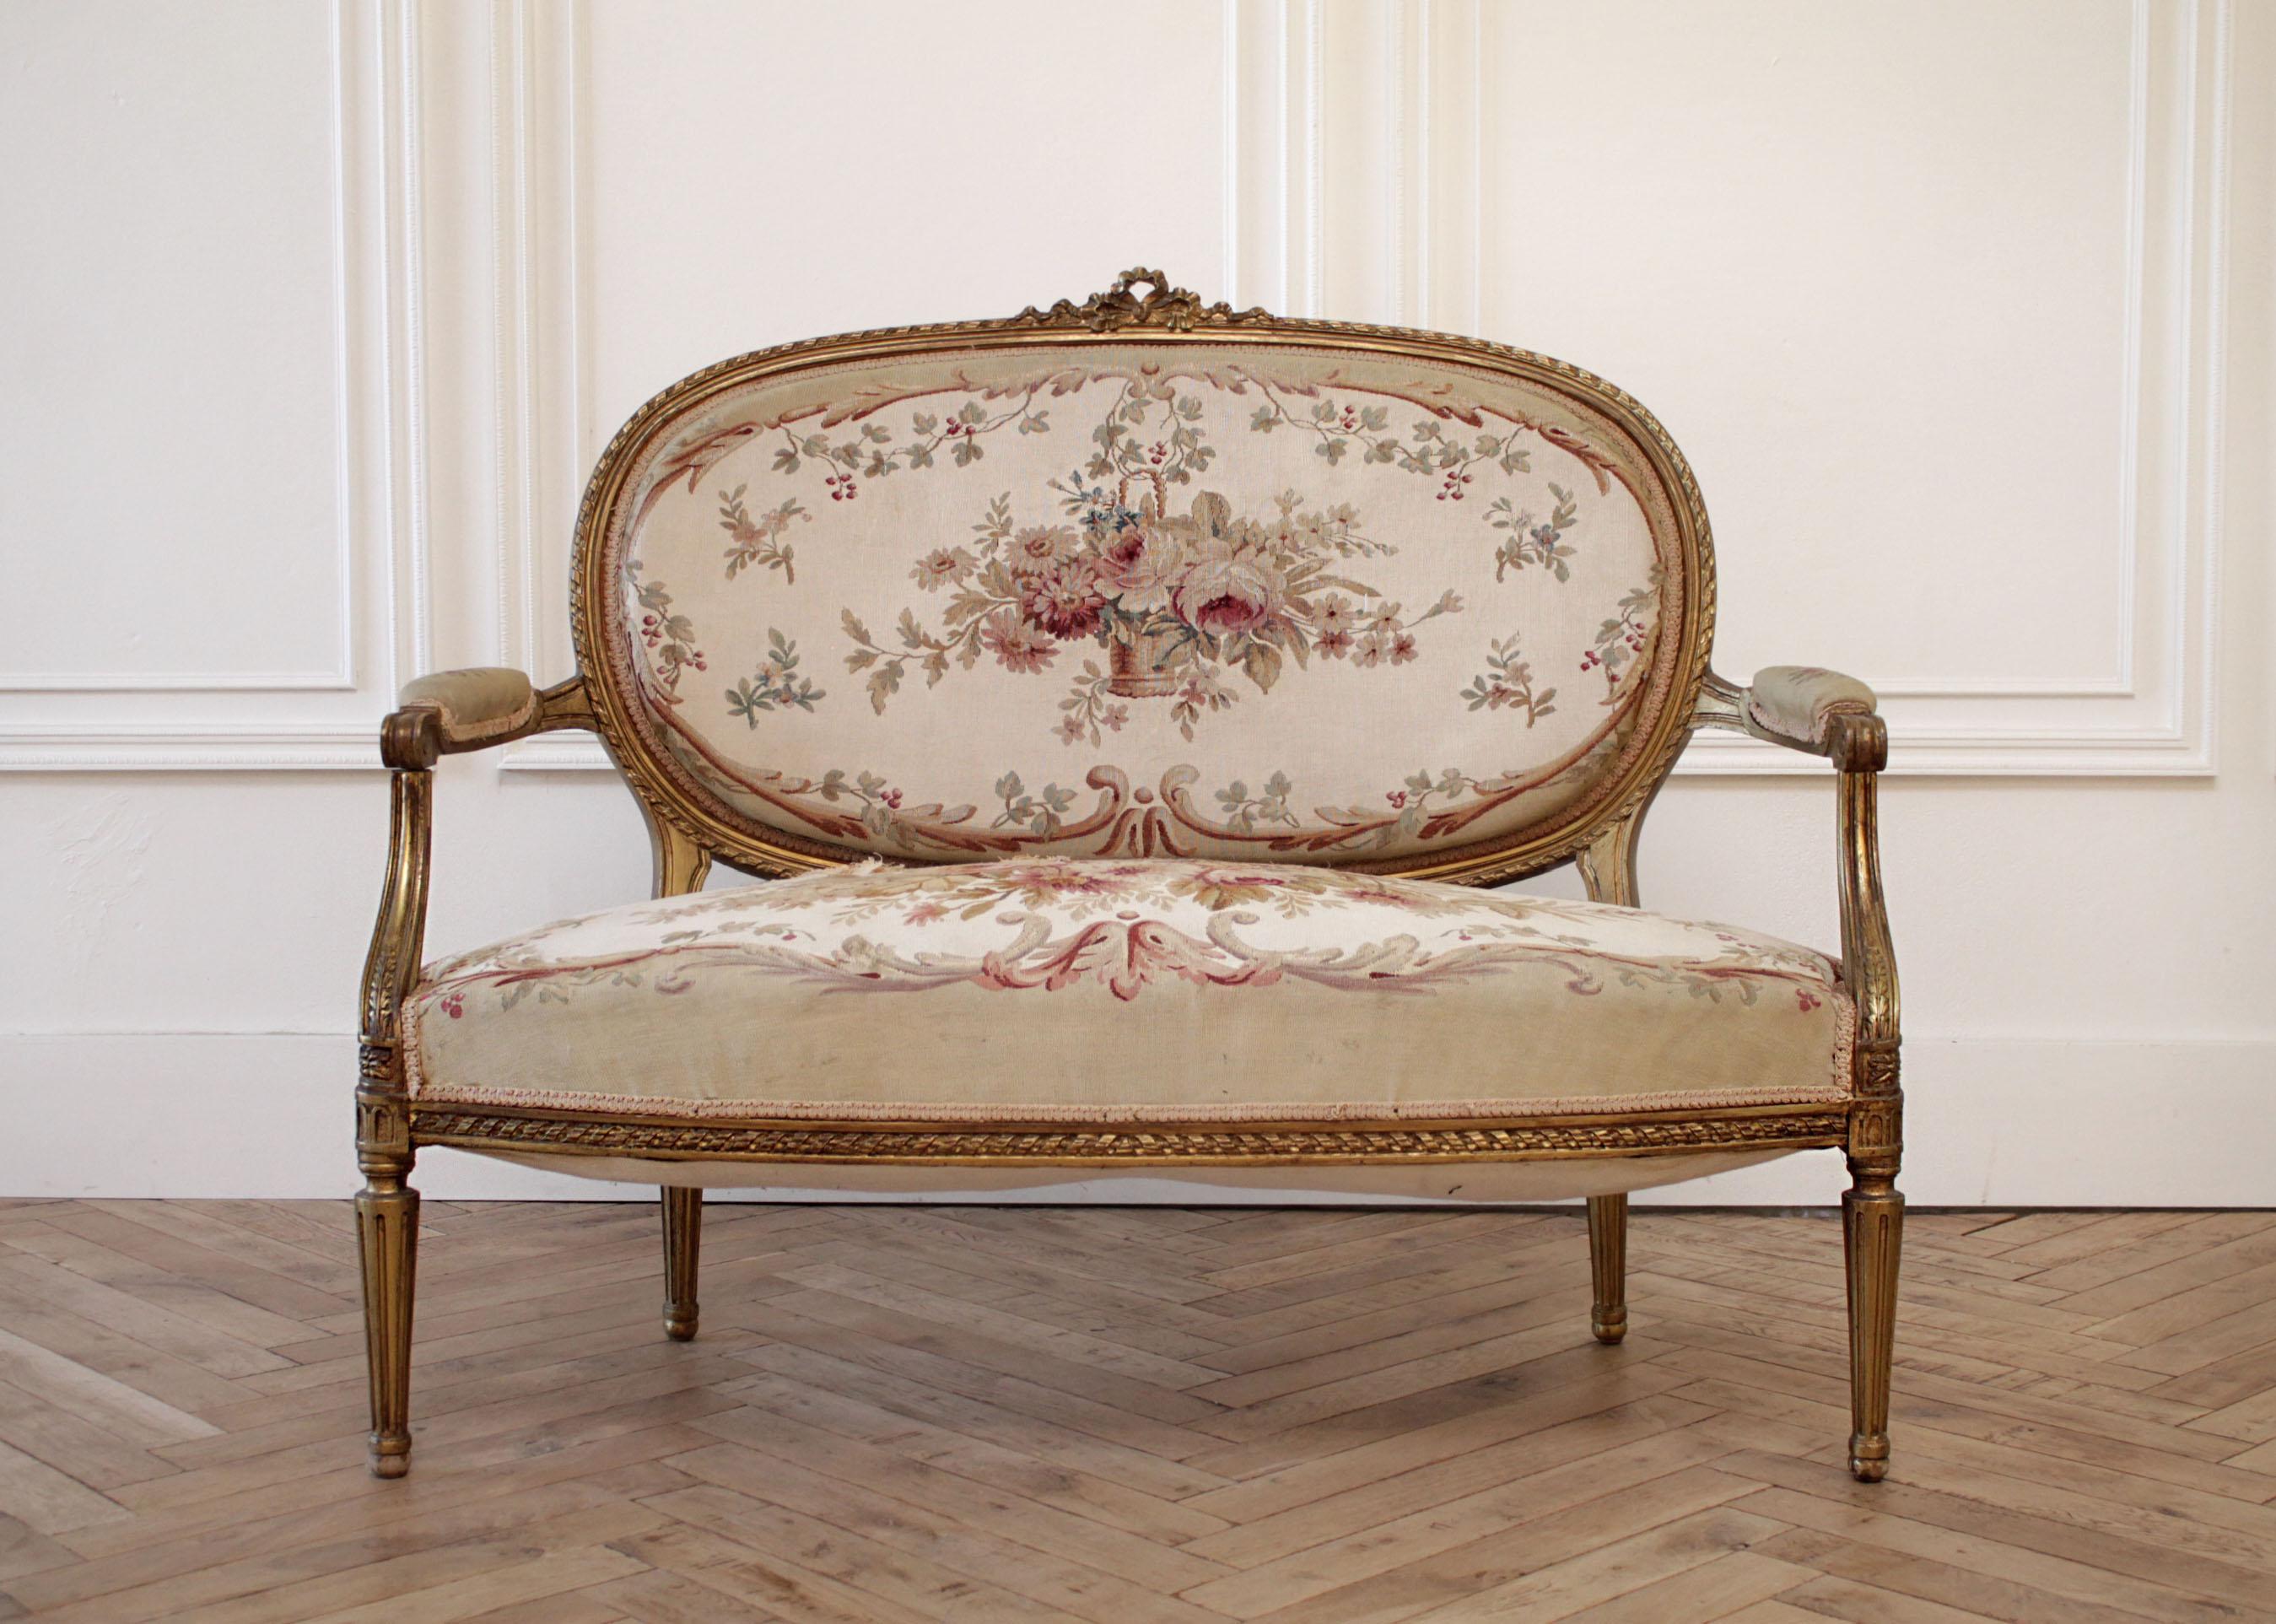 Early 20th century giltwood Ribbon carved settee with original needlepoint
Original gilt wood has great patina, upholstered in original needlepoint tapestry. The upholstery has some wear, the seat has a small hole. See photos.
We can assist with